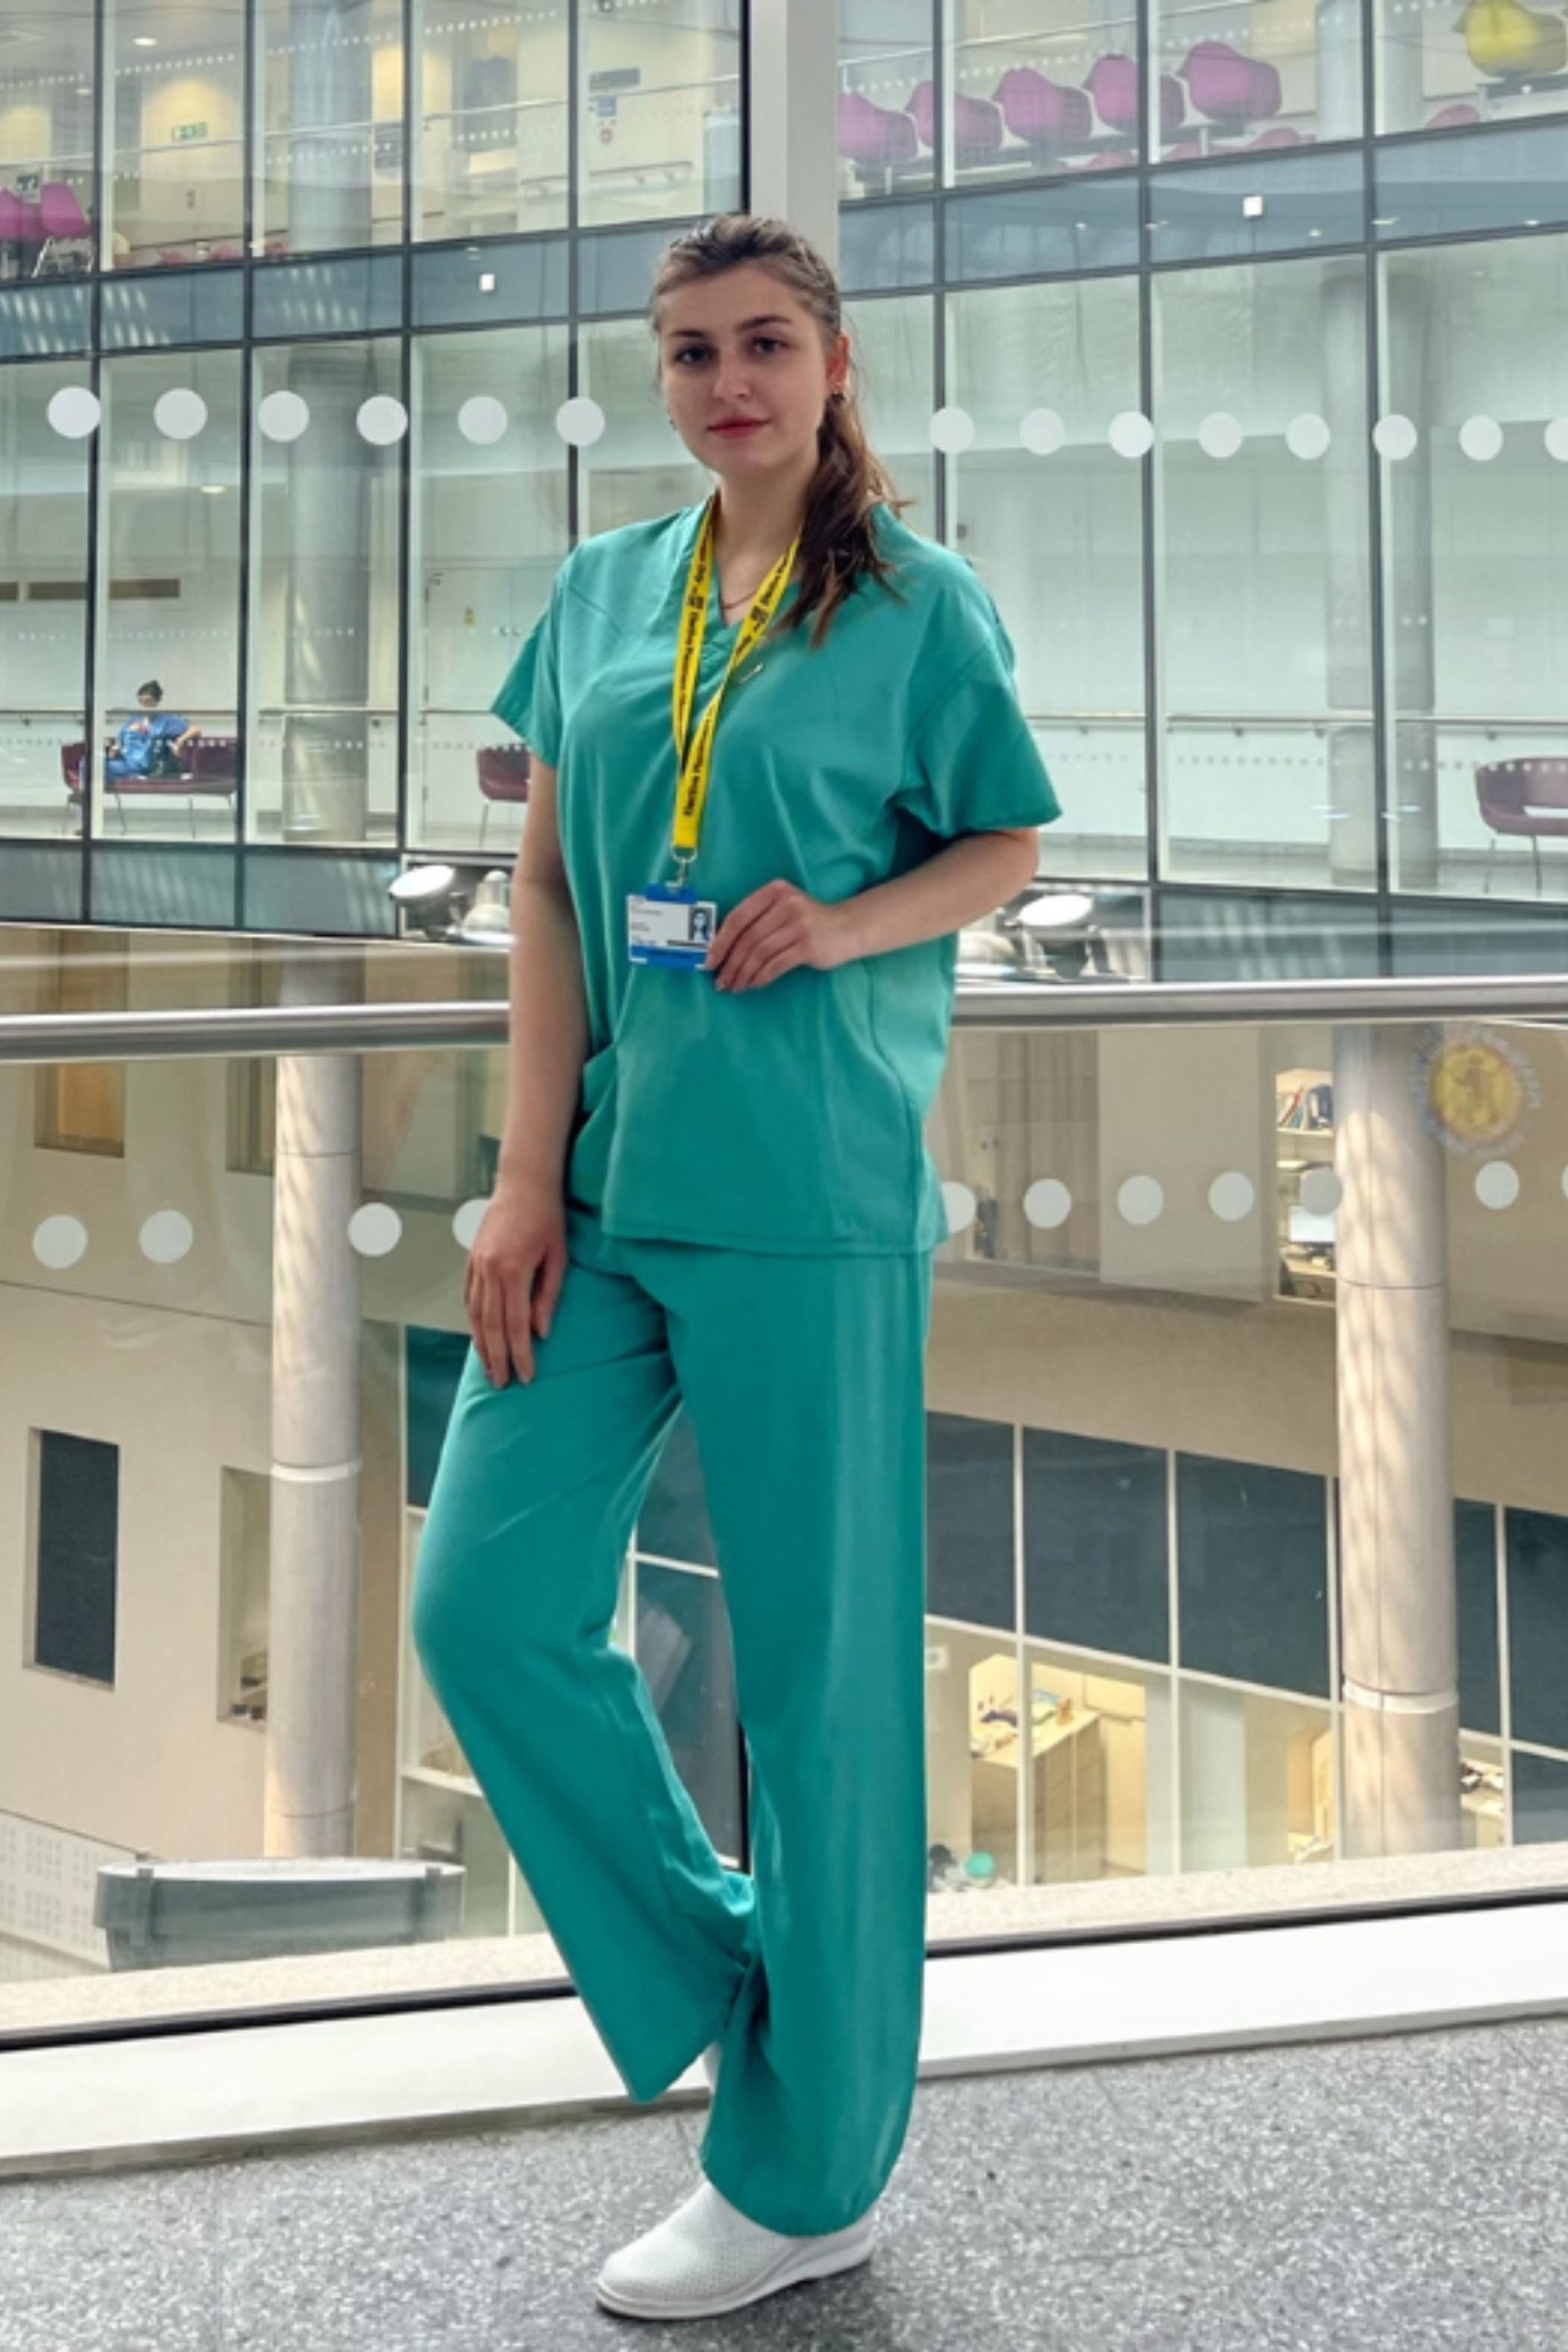 Julia, one of the students from Odessa National Medical University, on placement